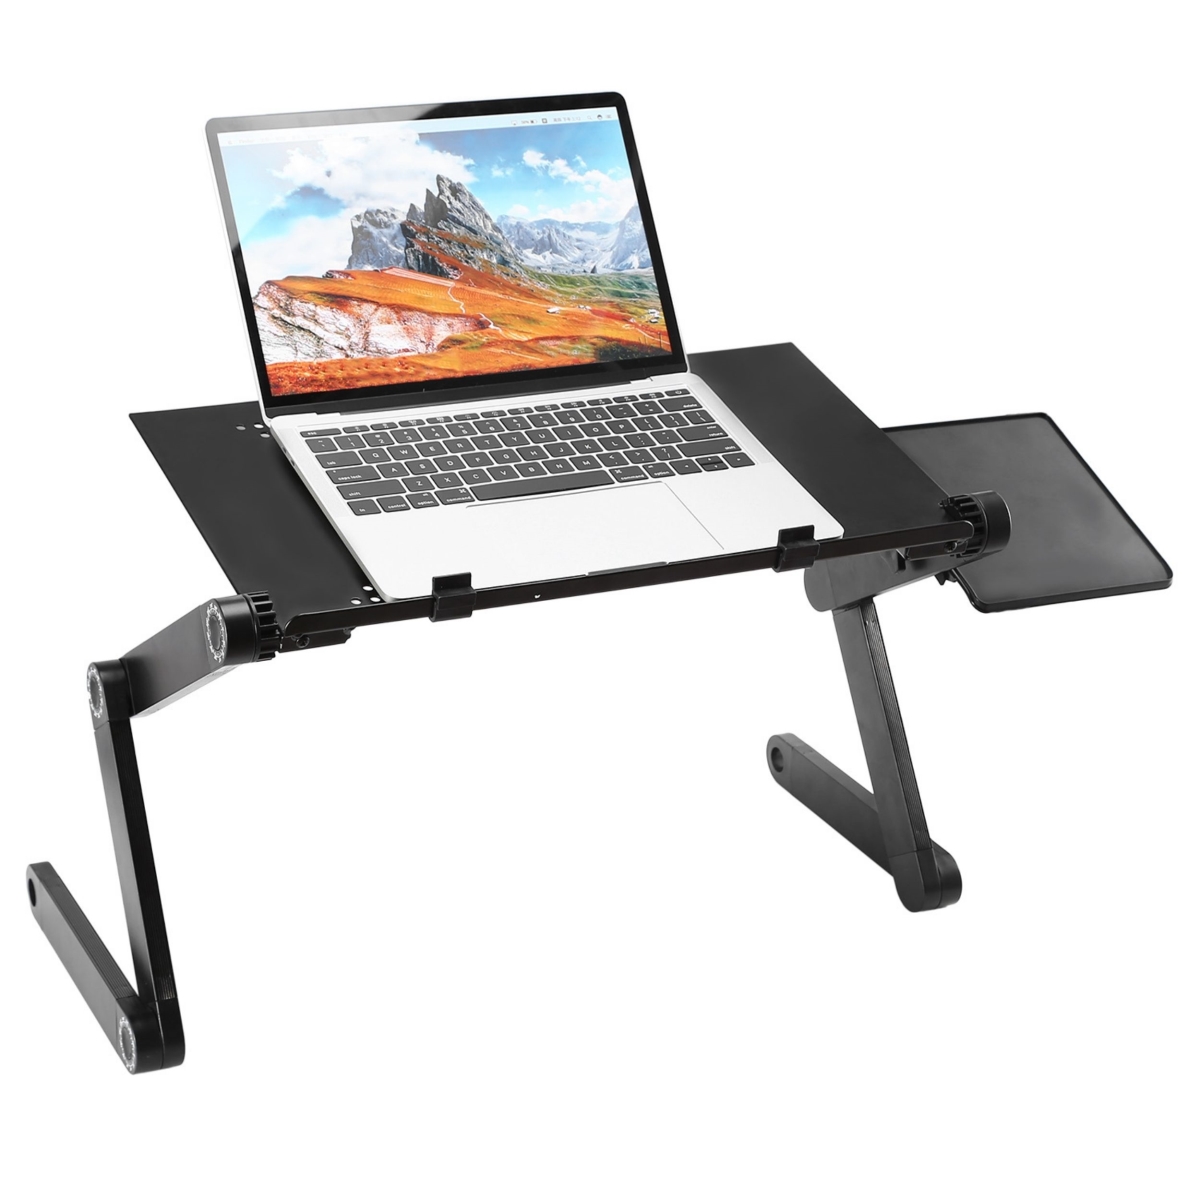 Fresh Fab Finds FFF-GPCT1656 Foldable Laptop Table Bed Desk Aluminum Alloy Breakfast Tray w/ Mouse Board for Home Office Travel